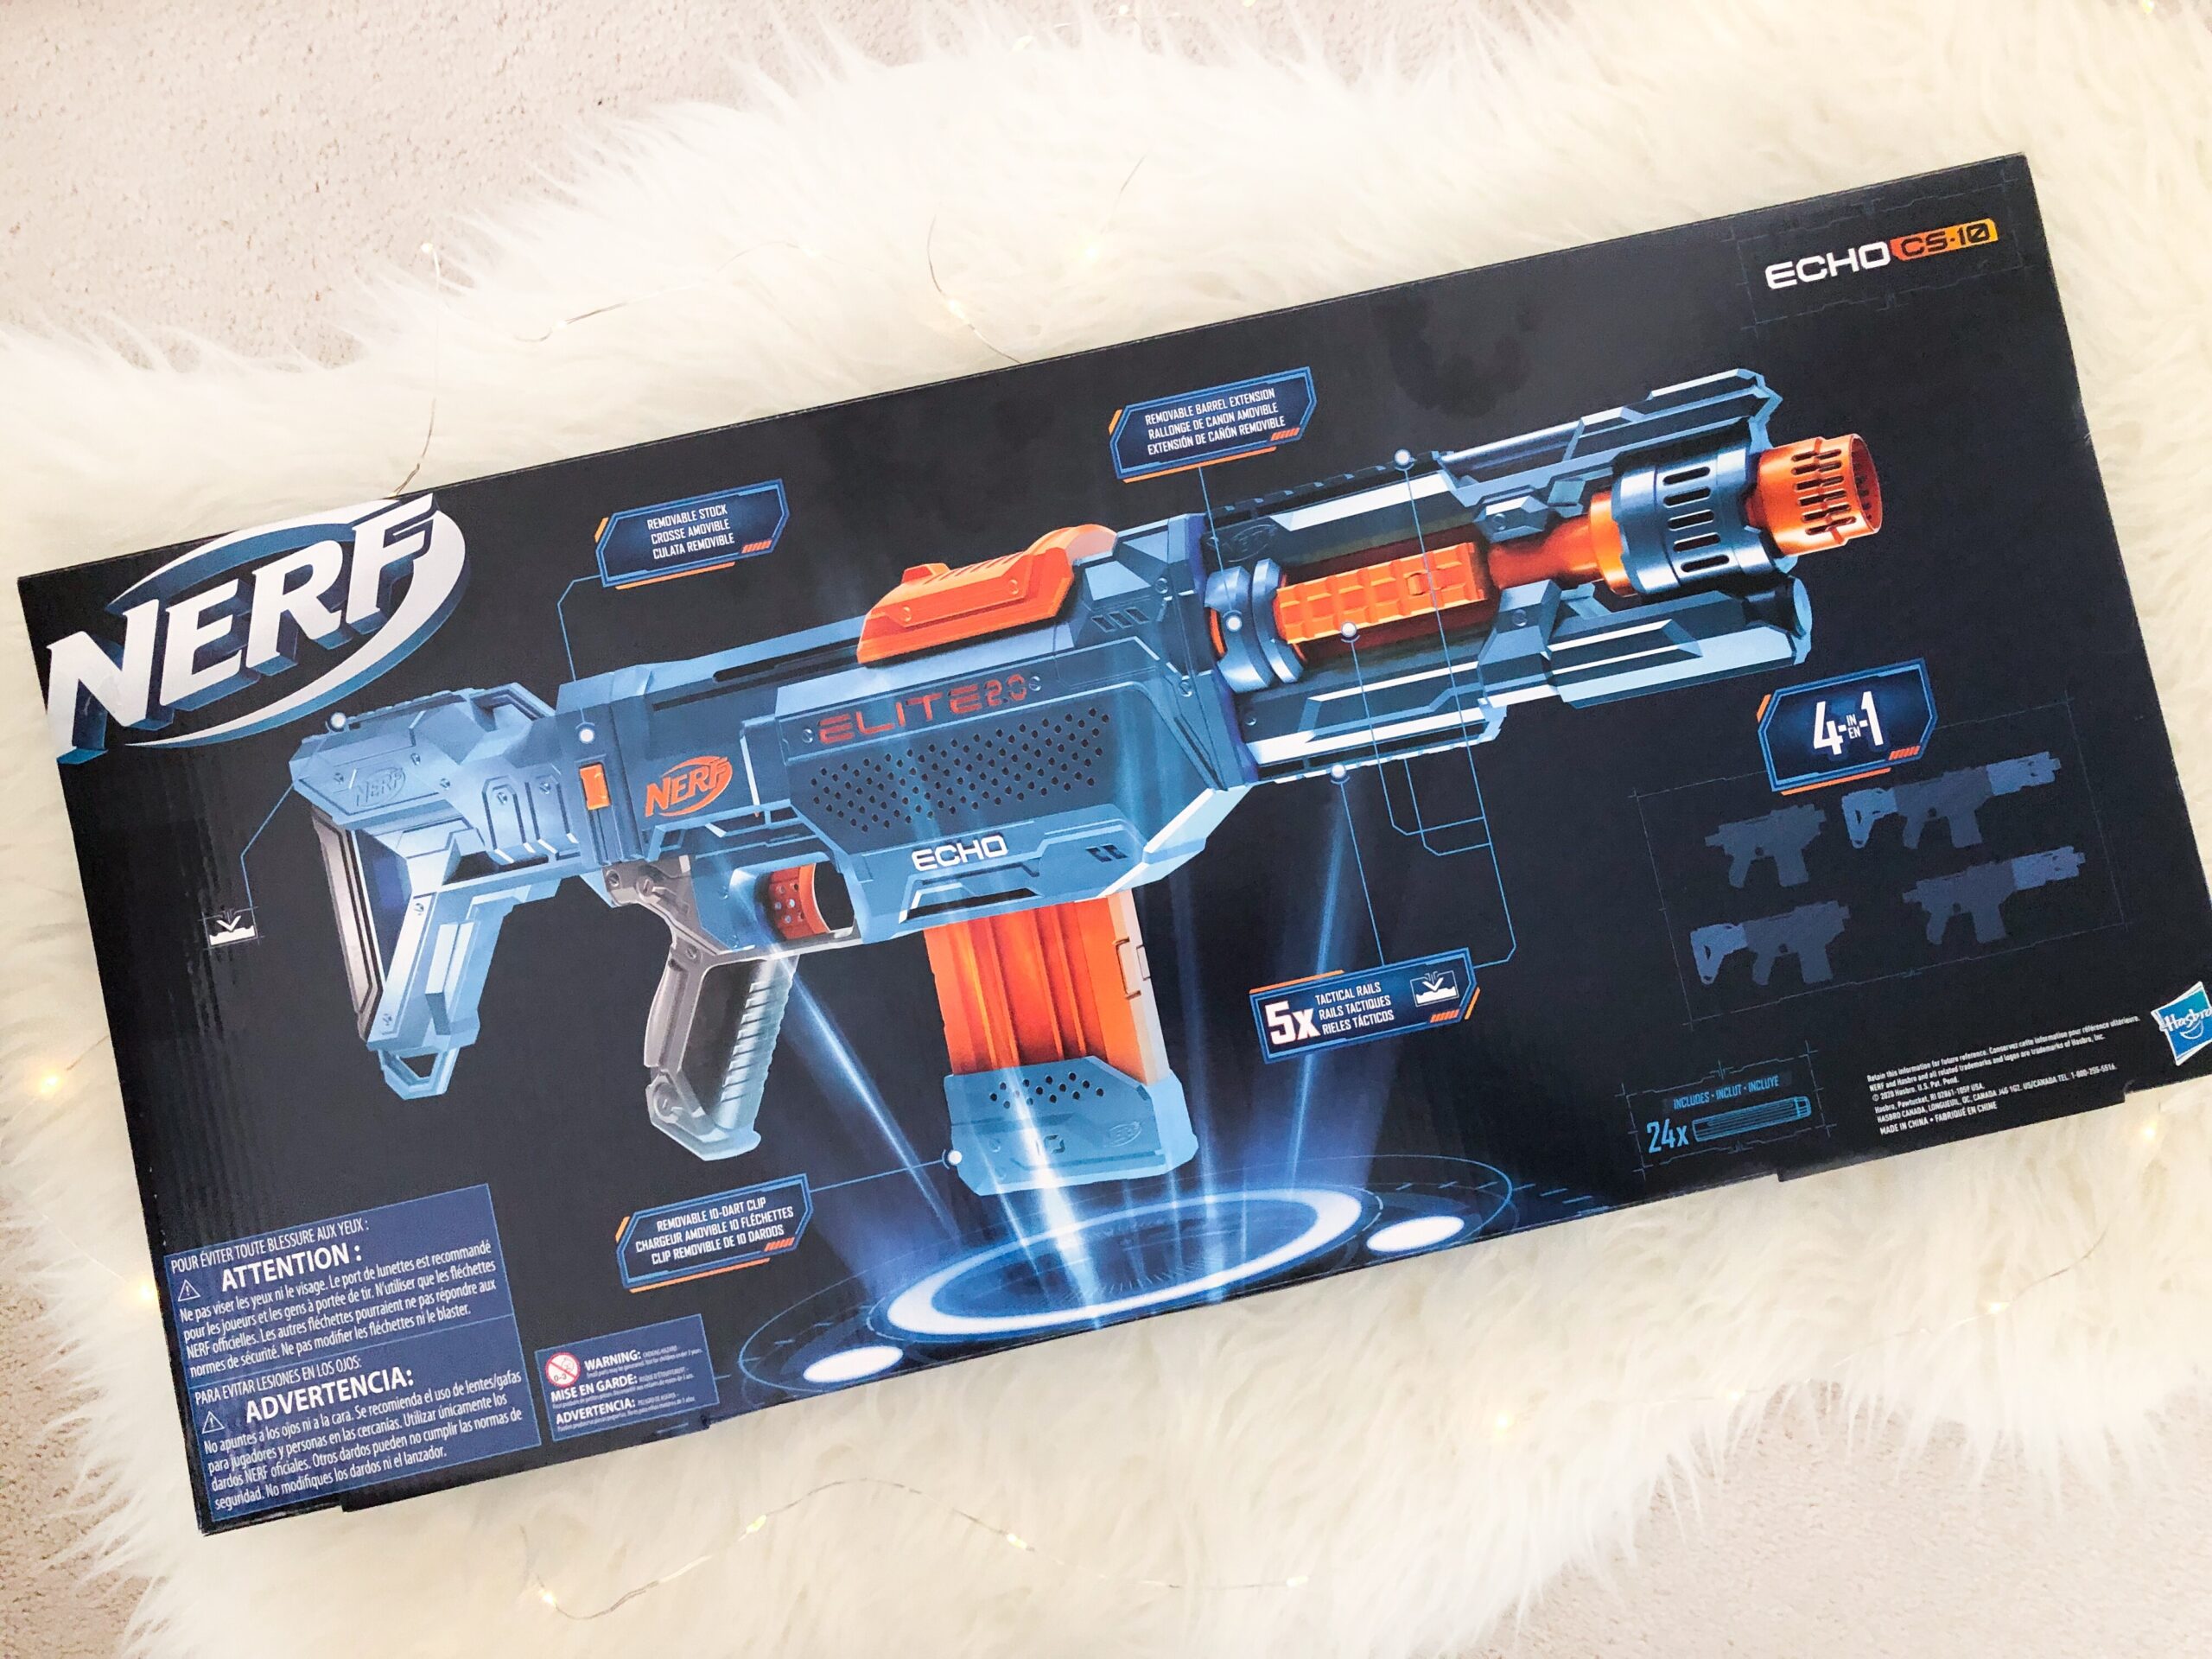 Hasbro Gift Guide for Kids on livin' Life with Style-Nerf Blaster